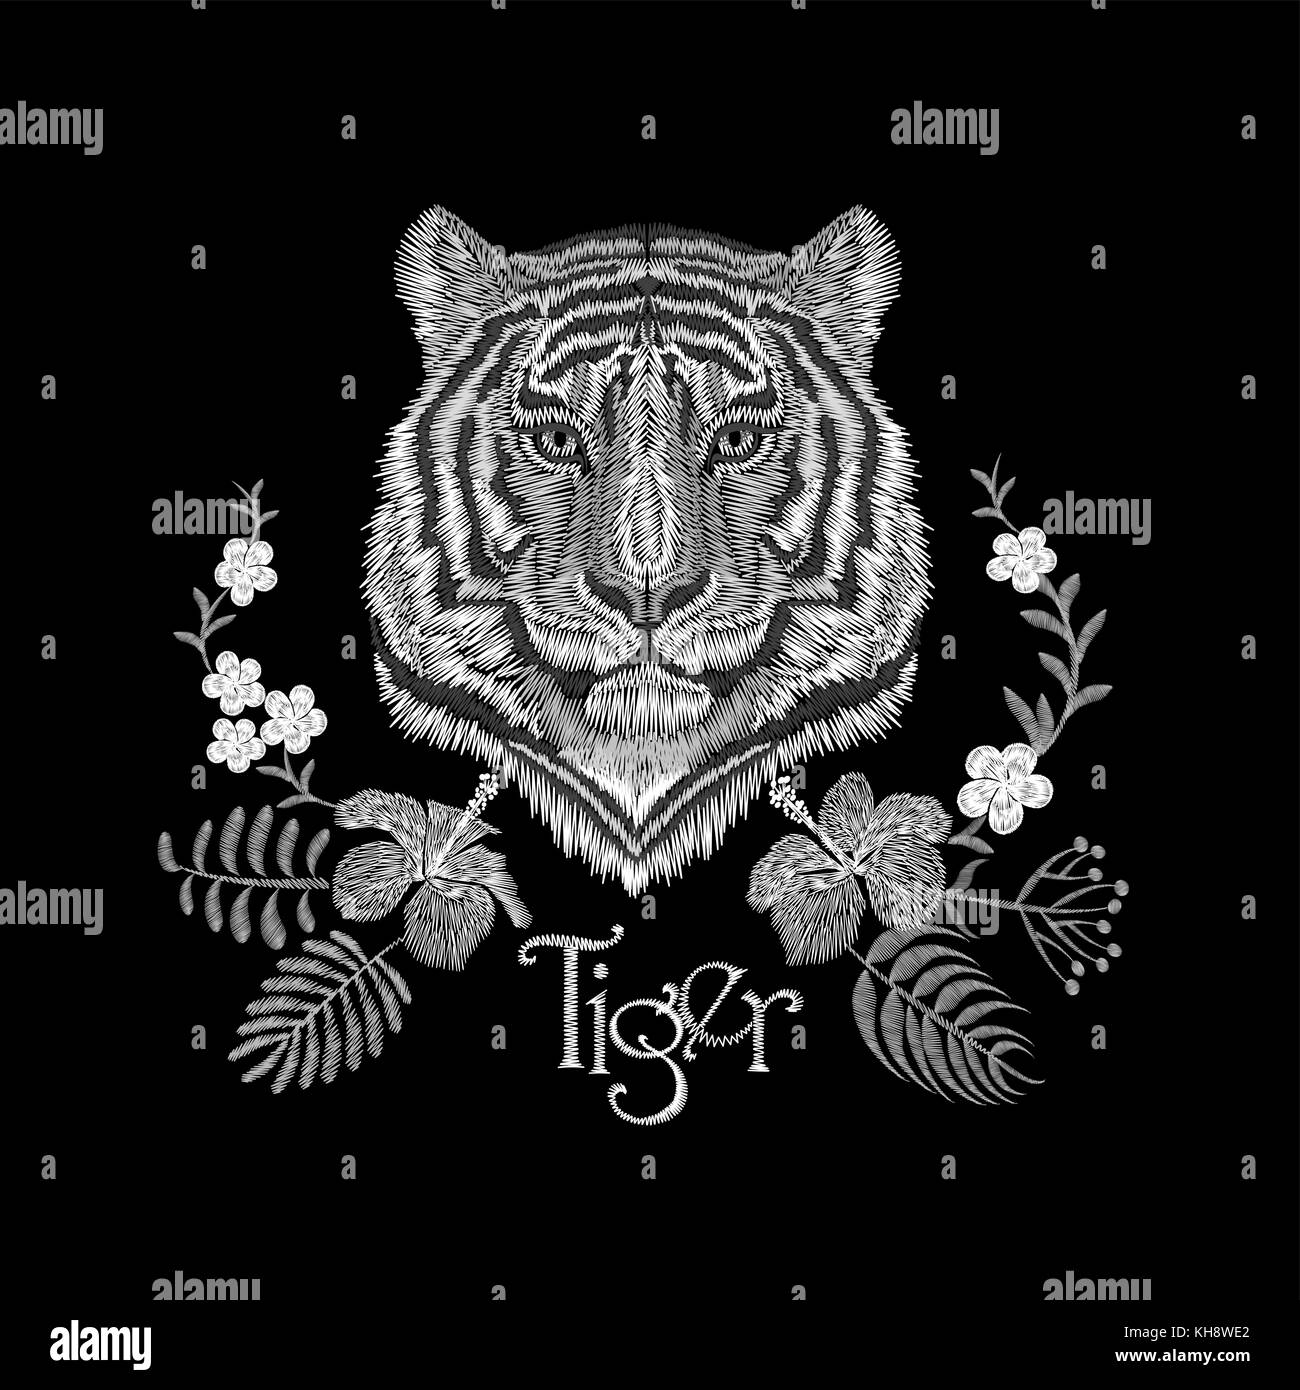 White embroidery realistic texture tiger face patch. Fashion floral print textile decoration design with inscription vector illustration Stock Vector